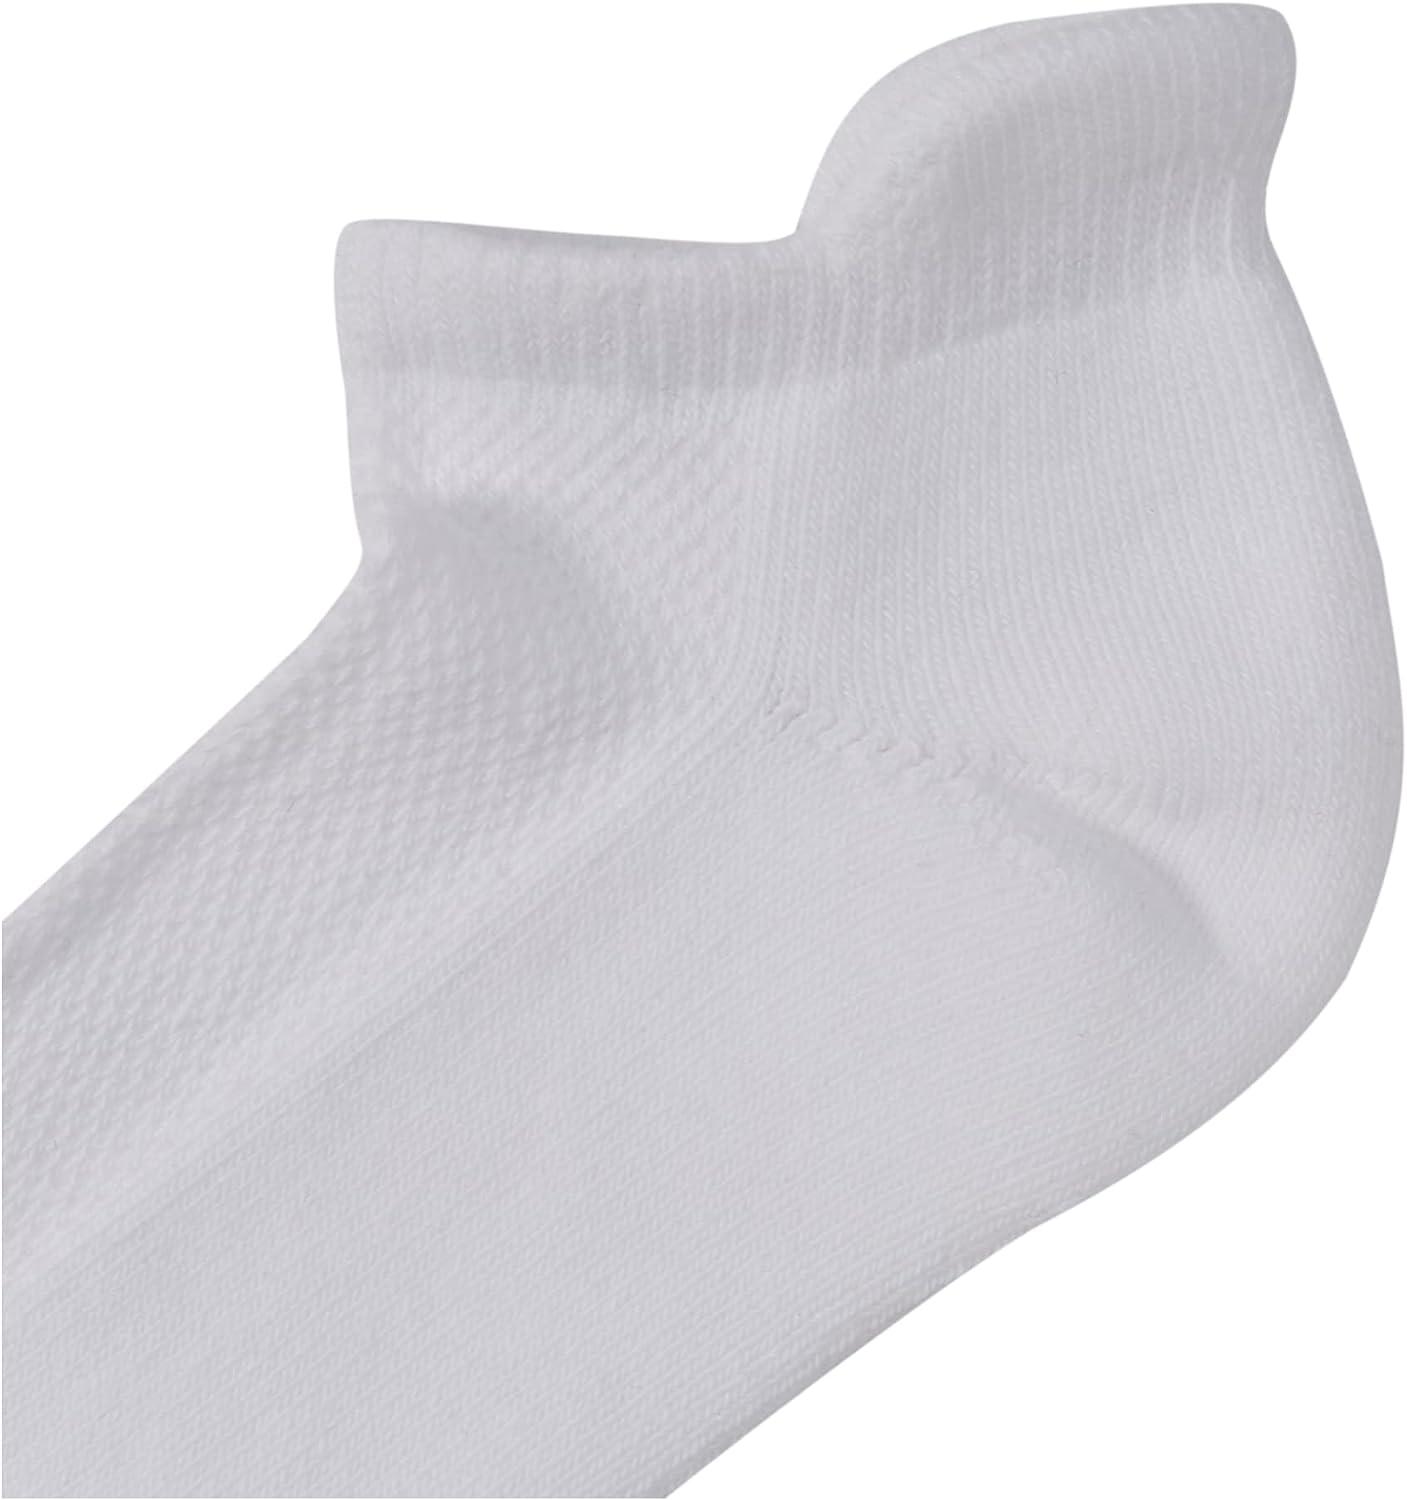 No nonsense womens Soft & Breathable Cushioned No Show With Back Tab, 9  Pair Pack Running Socks, White - Pair Pack, 4-10 US